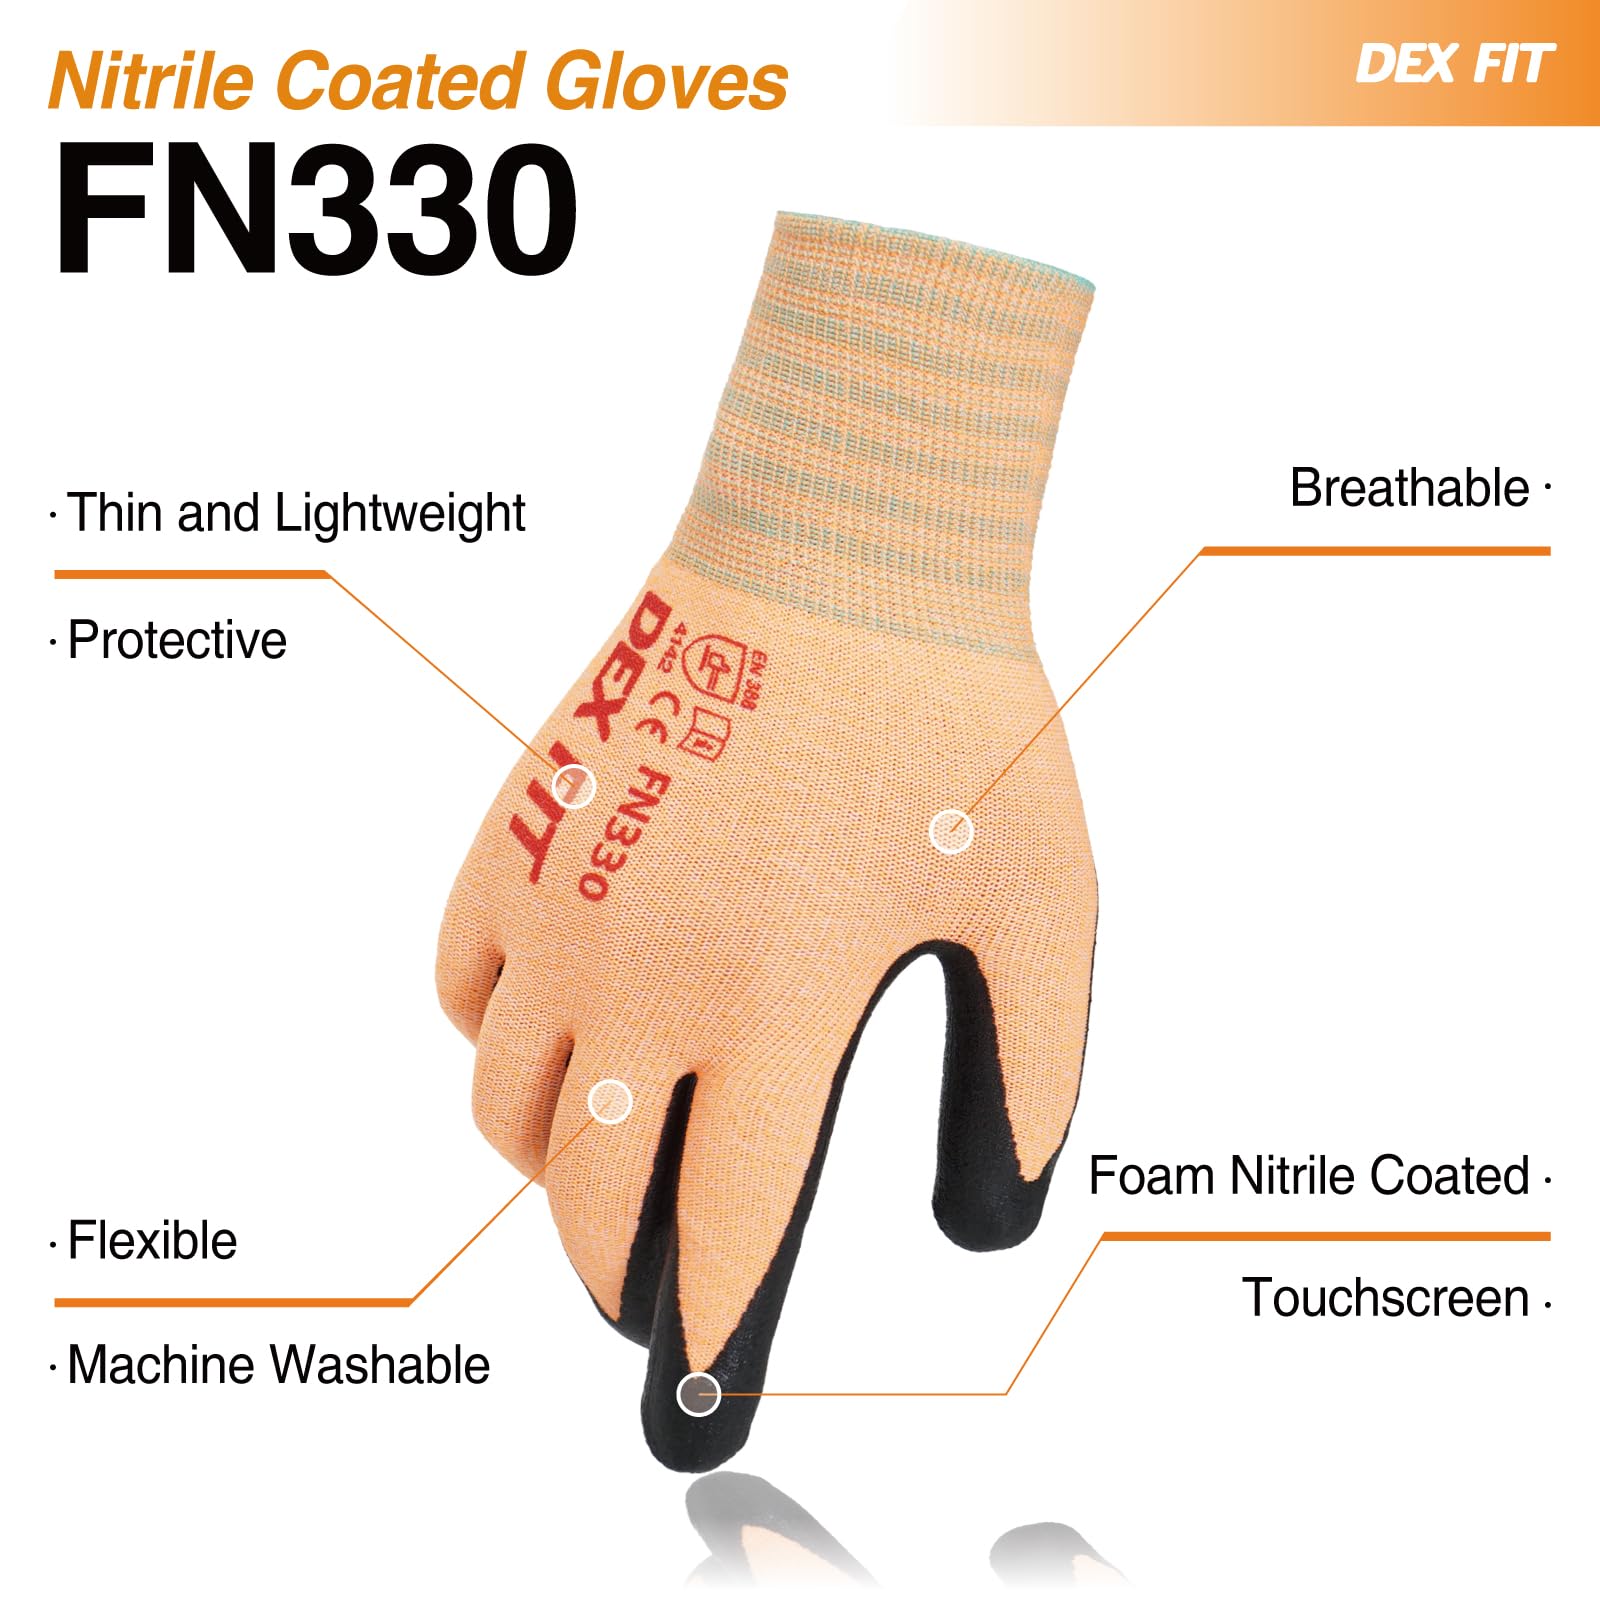 DEX FIT Nitrile Work Gloves FN330, 3D-Comfort Stretchy Fit, Firm Grip, Thin & Lightweight, Touch-Screen Compatible, Durable, Breathable & Cool, Machine Washable; Orange 8 (M) 1 Pair